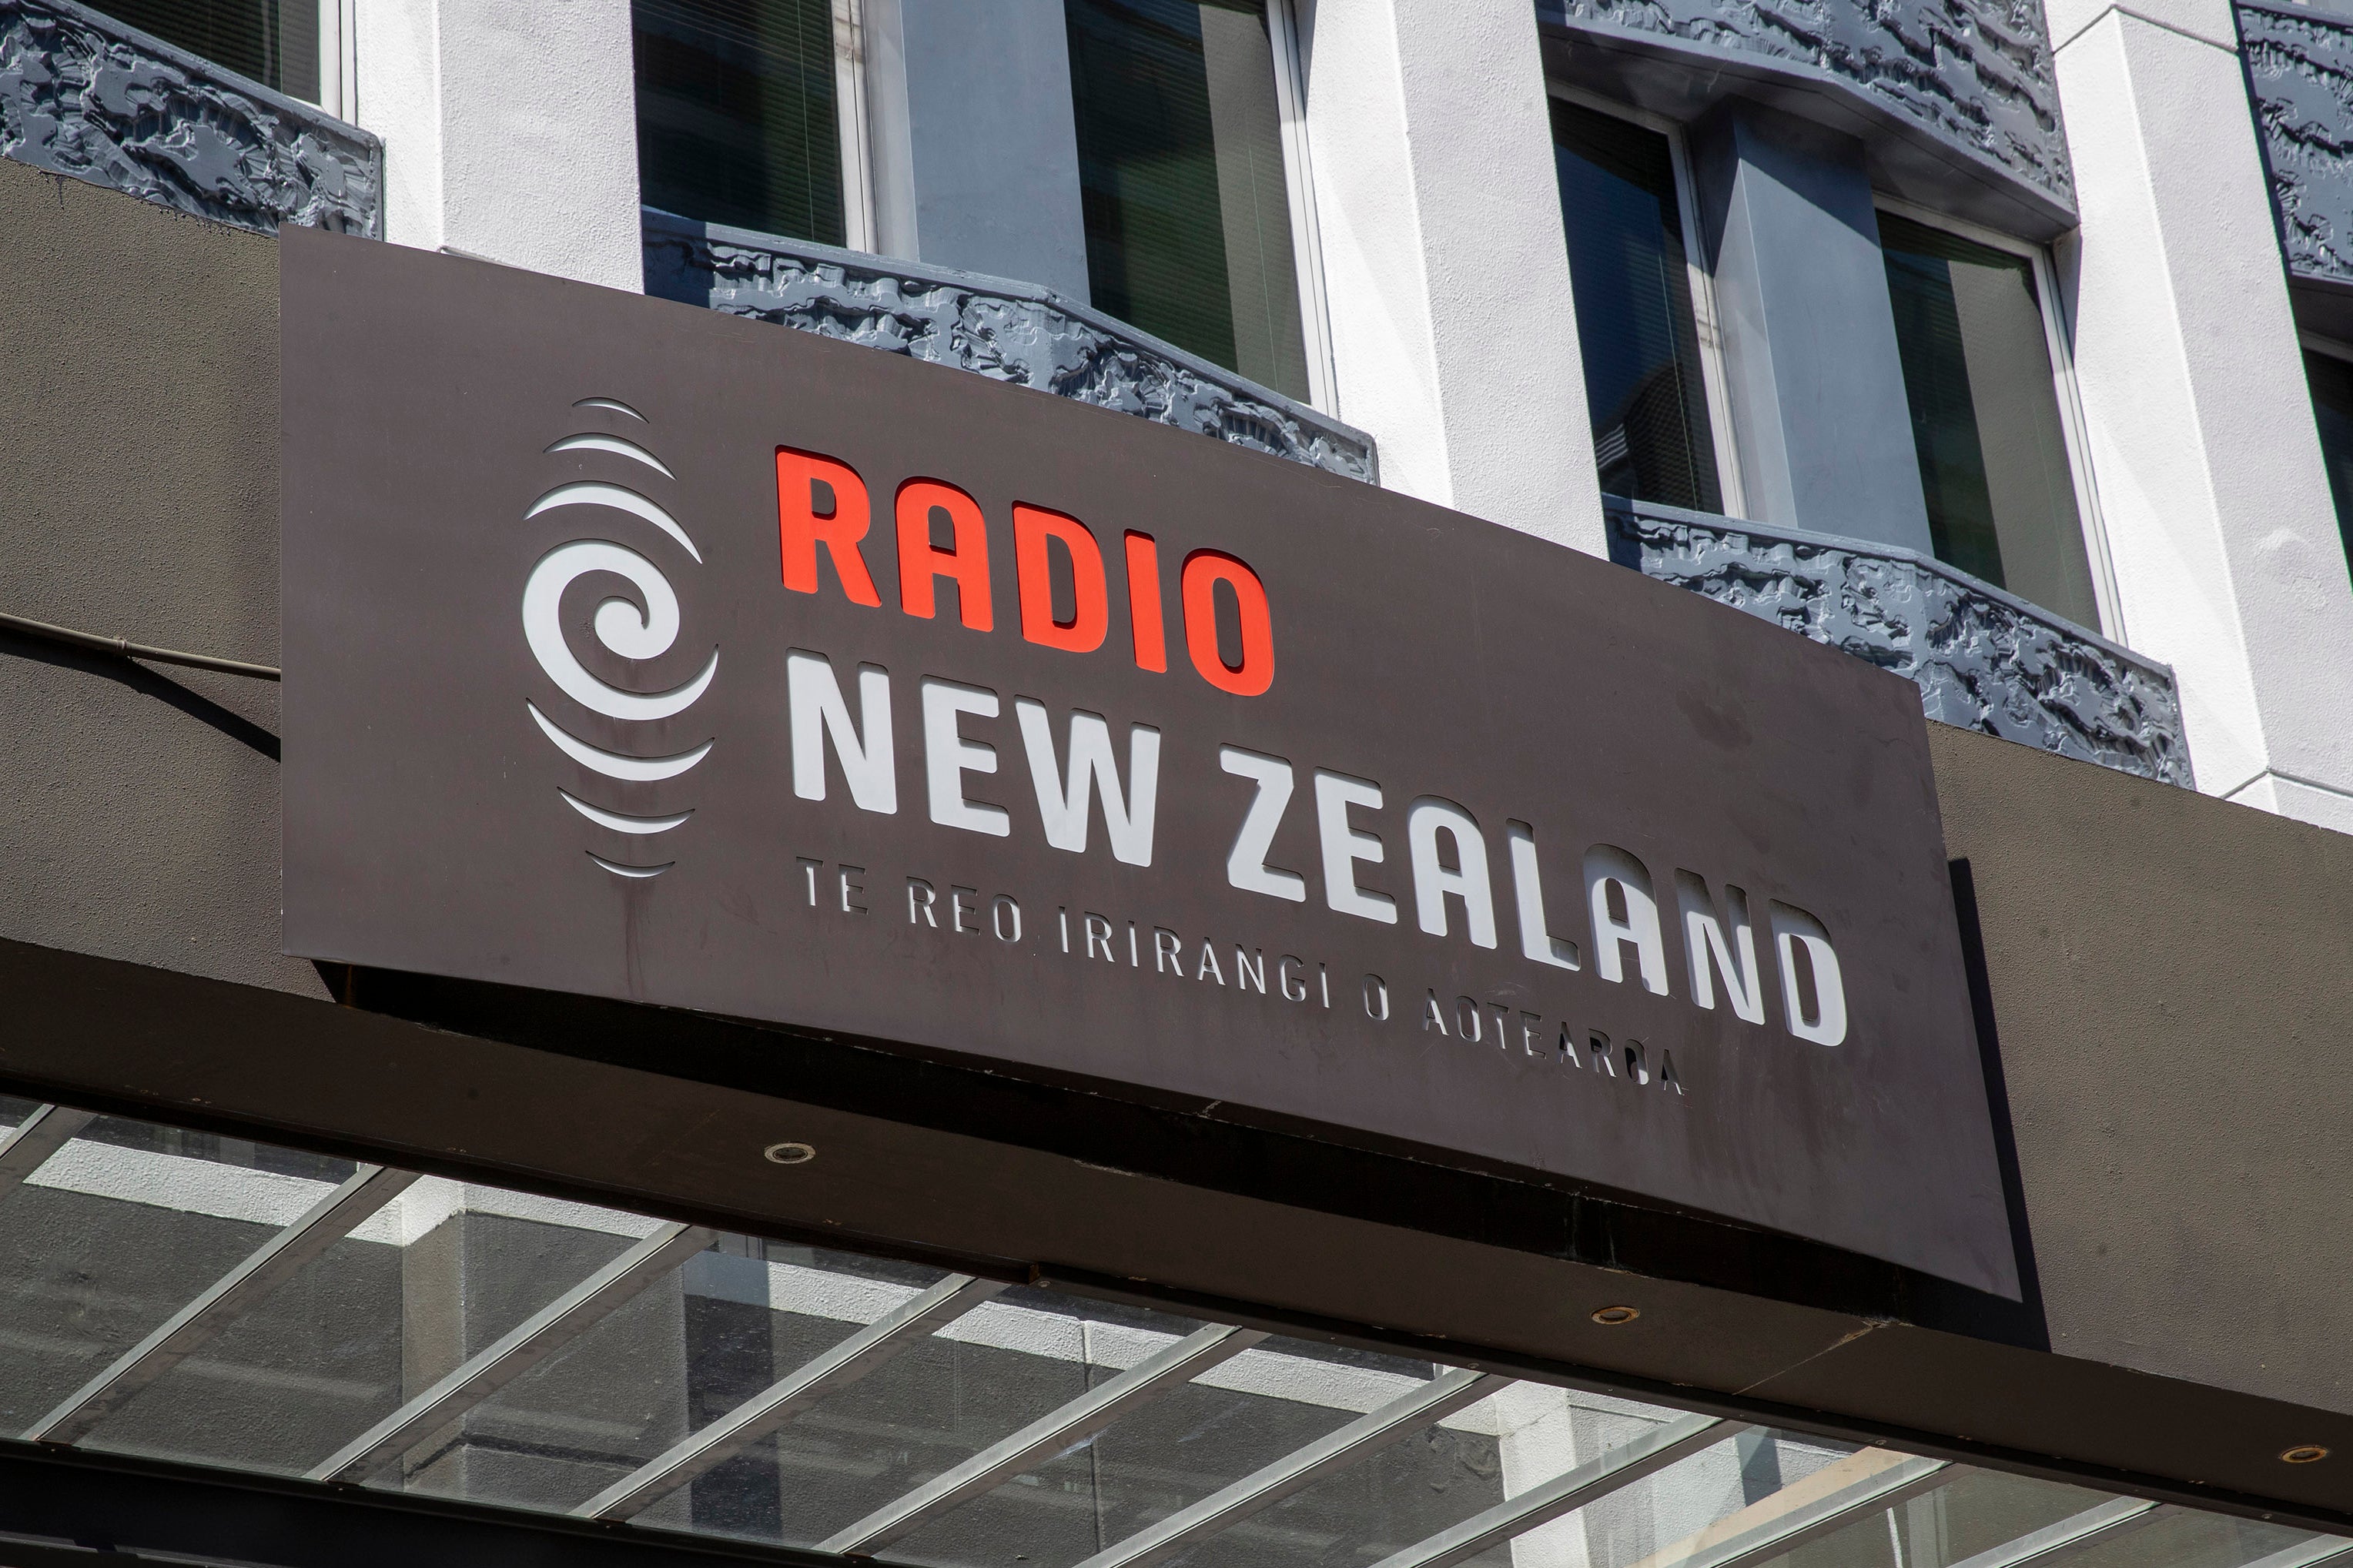 Signage is displayed on the Radio New Zealand building in Wellington, New Zealand